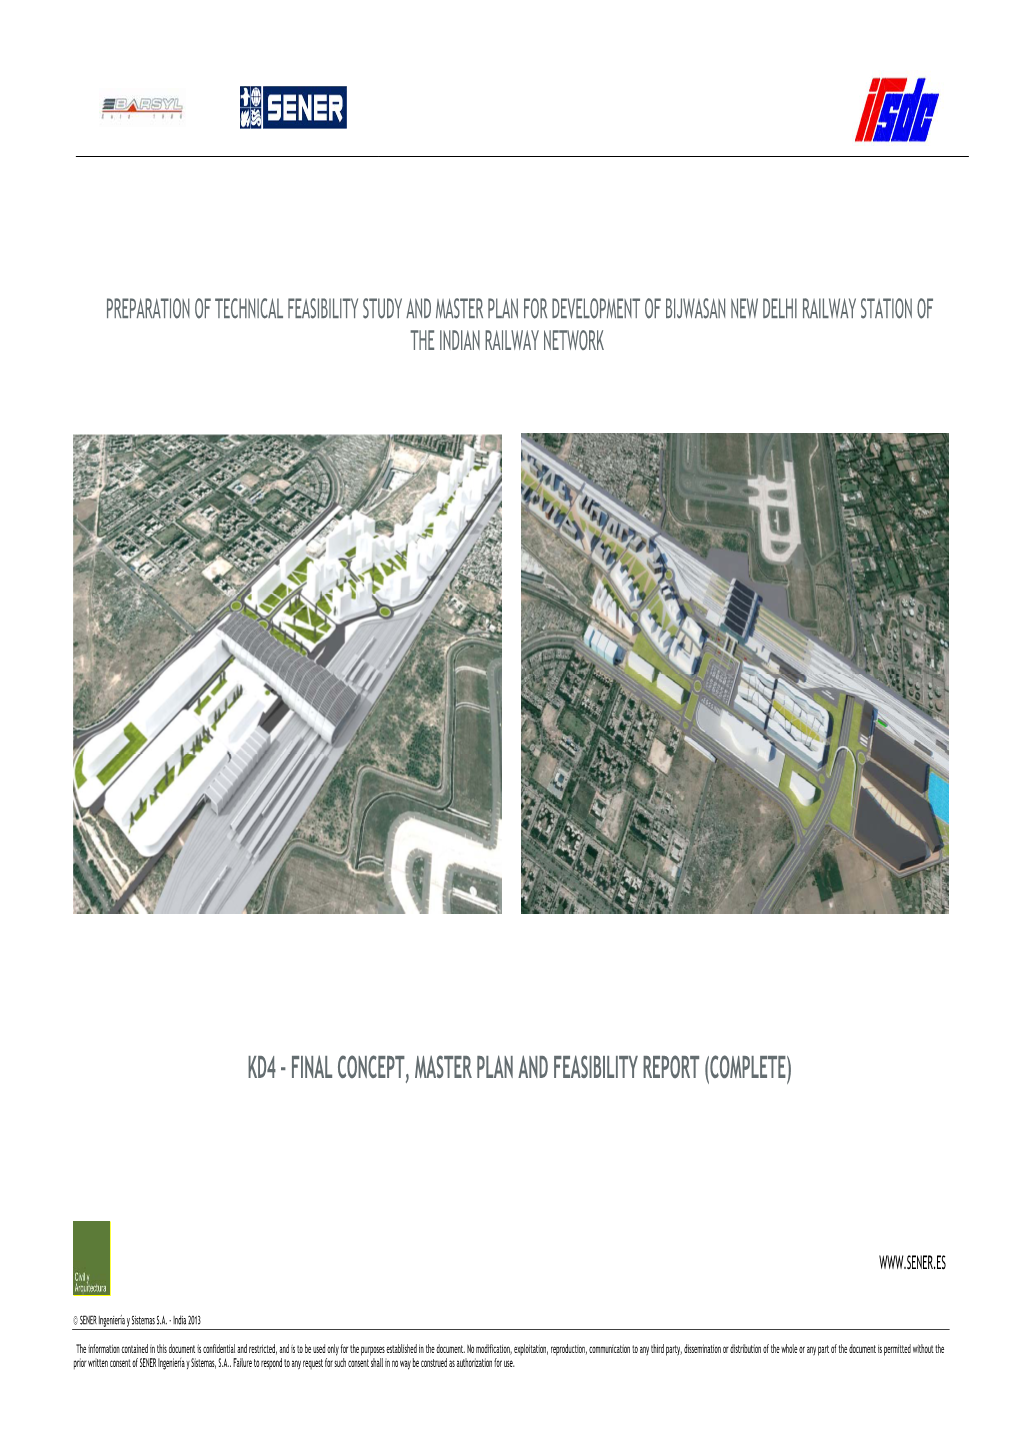 Kd4 – Final Concept, Master Plan and Feasibility Report (Complete)